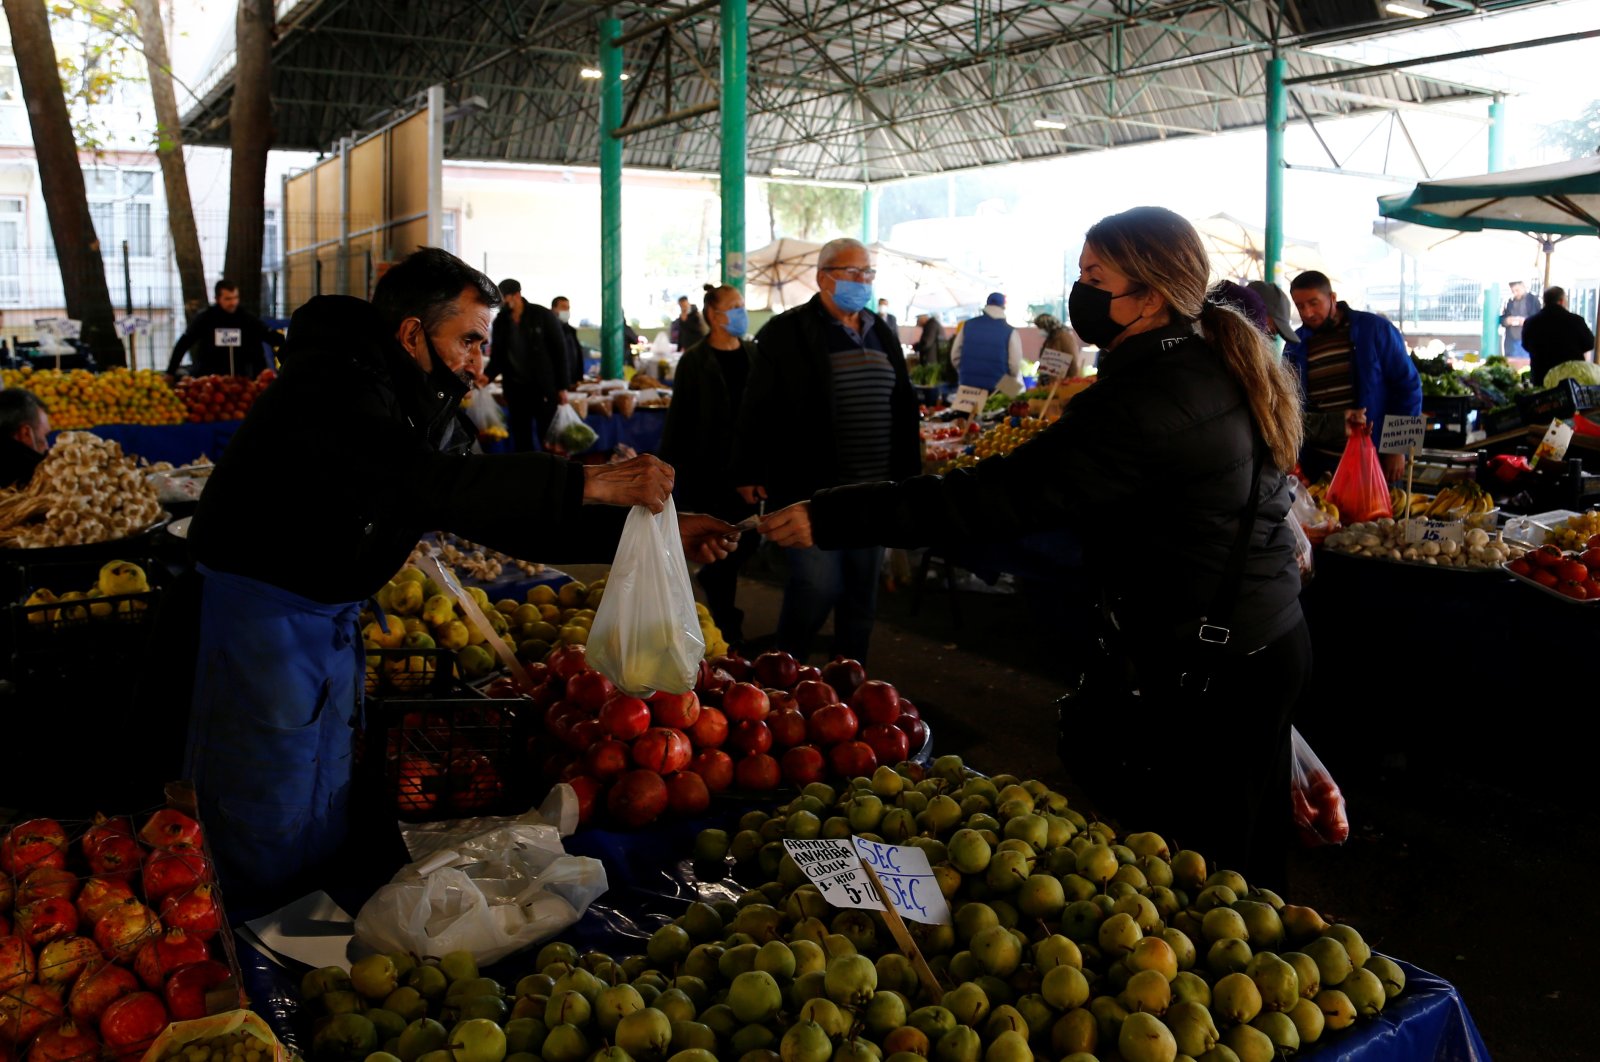 People shop at a local market in the capital Ankara, Turkey, Oct. 26, 2021. (Reuters Photo)